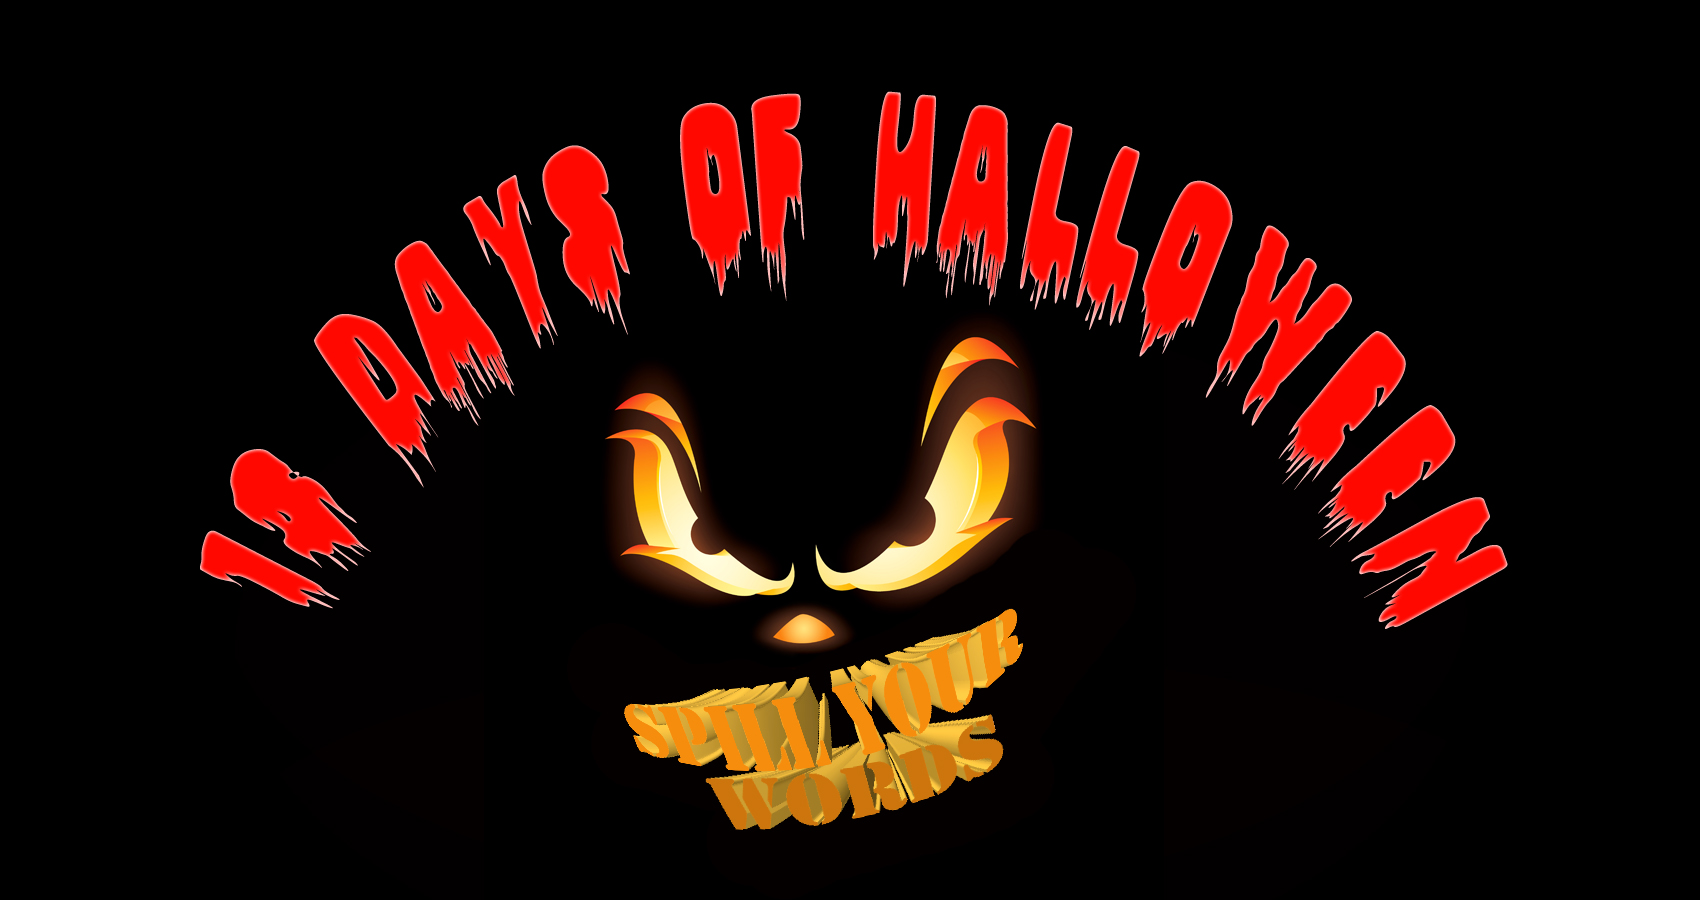 13 Days of Halloween series submission page at Spillwords.com